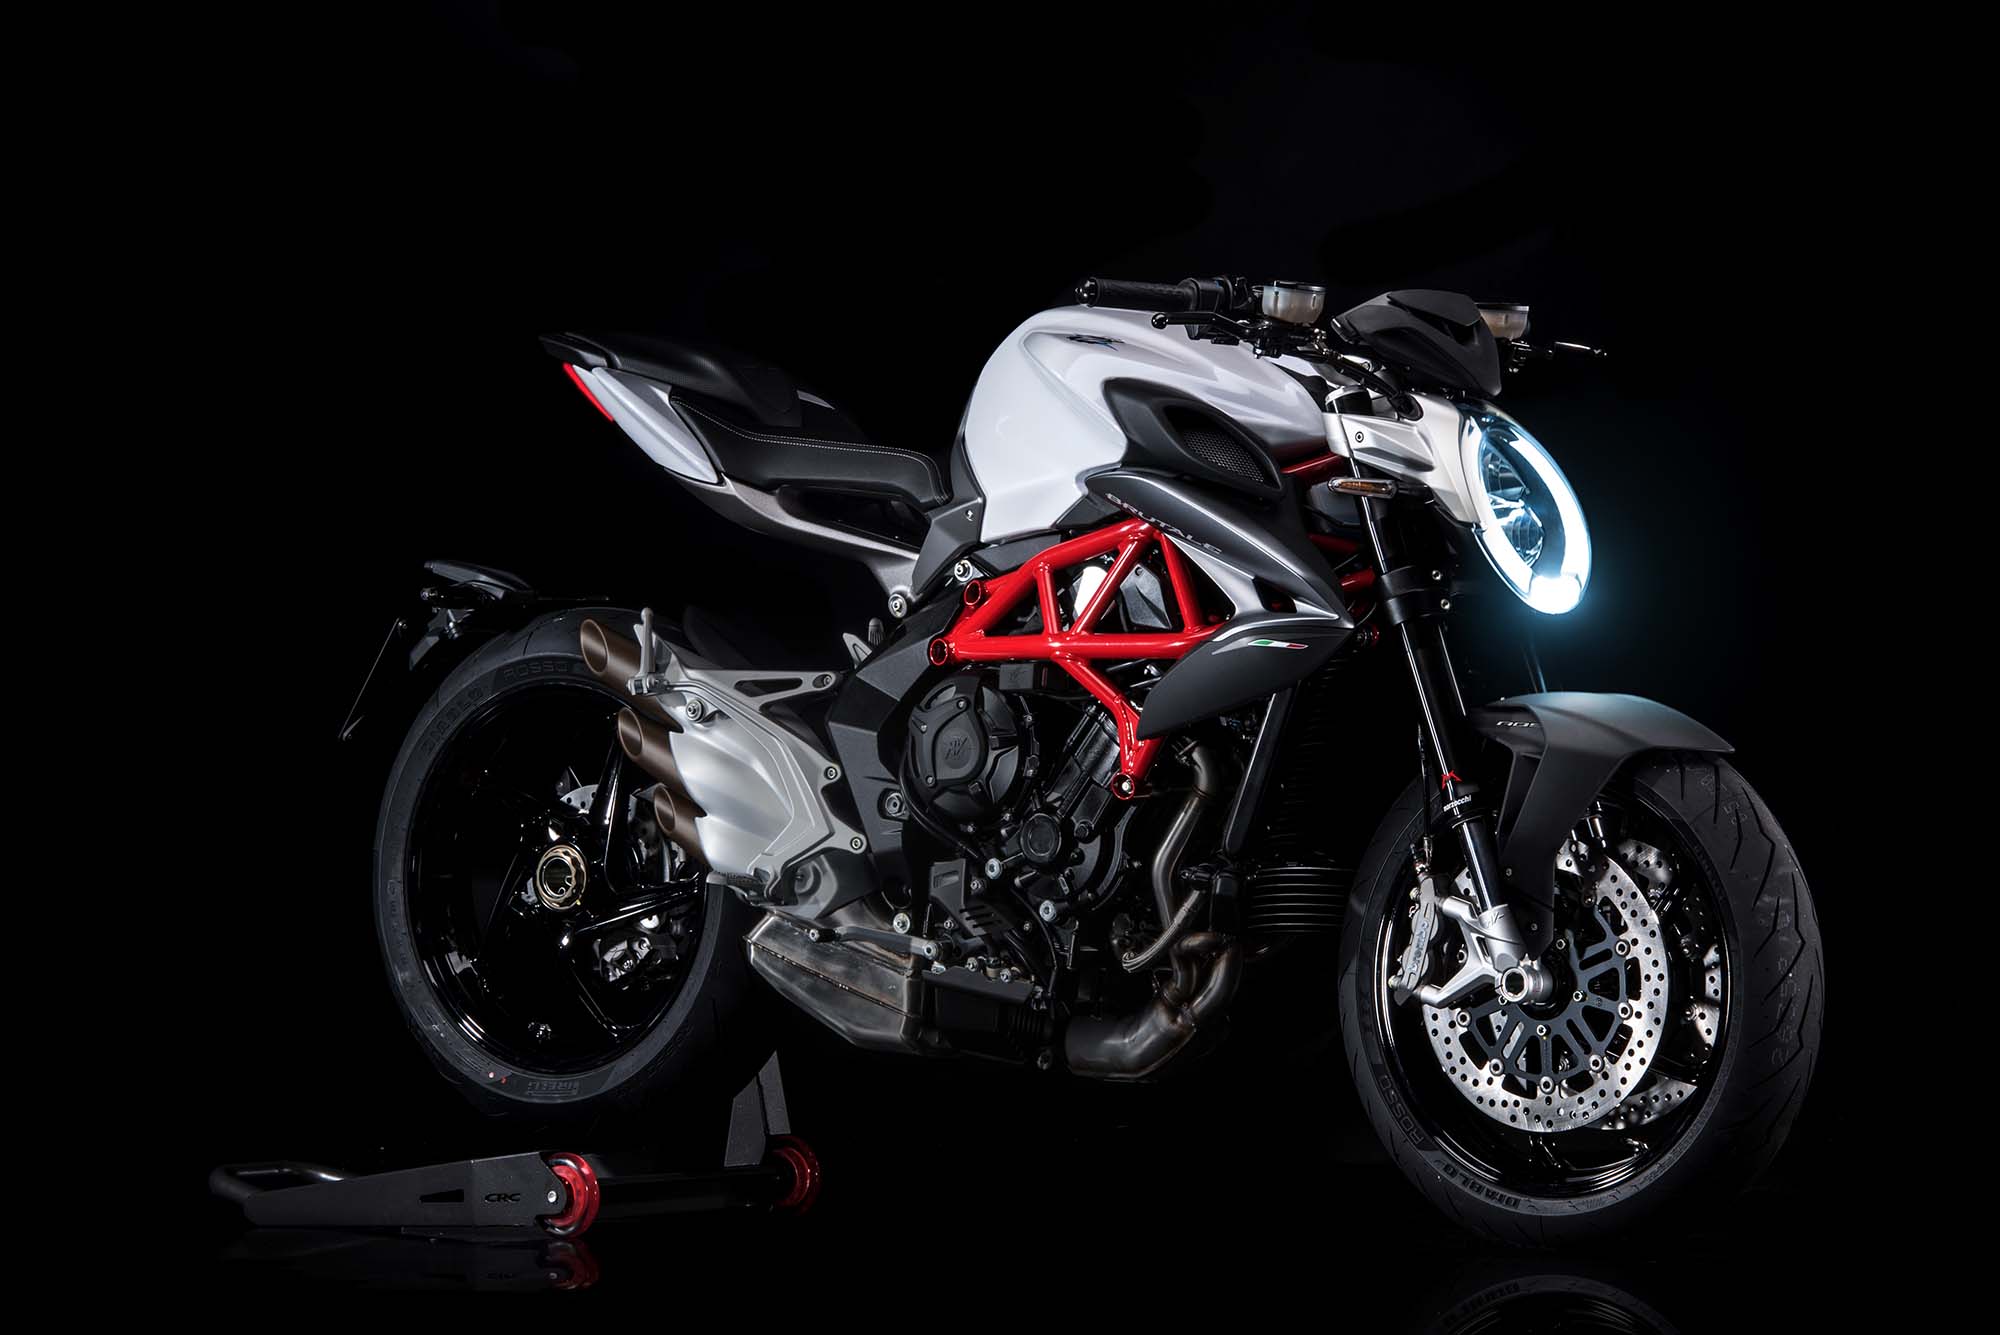 Amazing Agusta Brutale 800 Pictures & Backgrounds